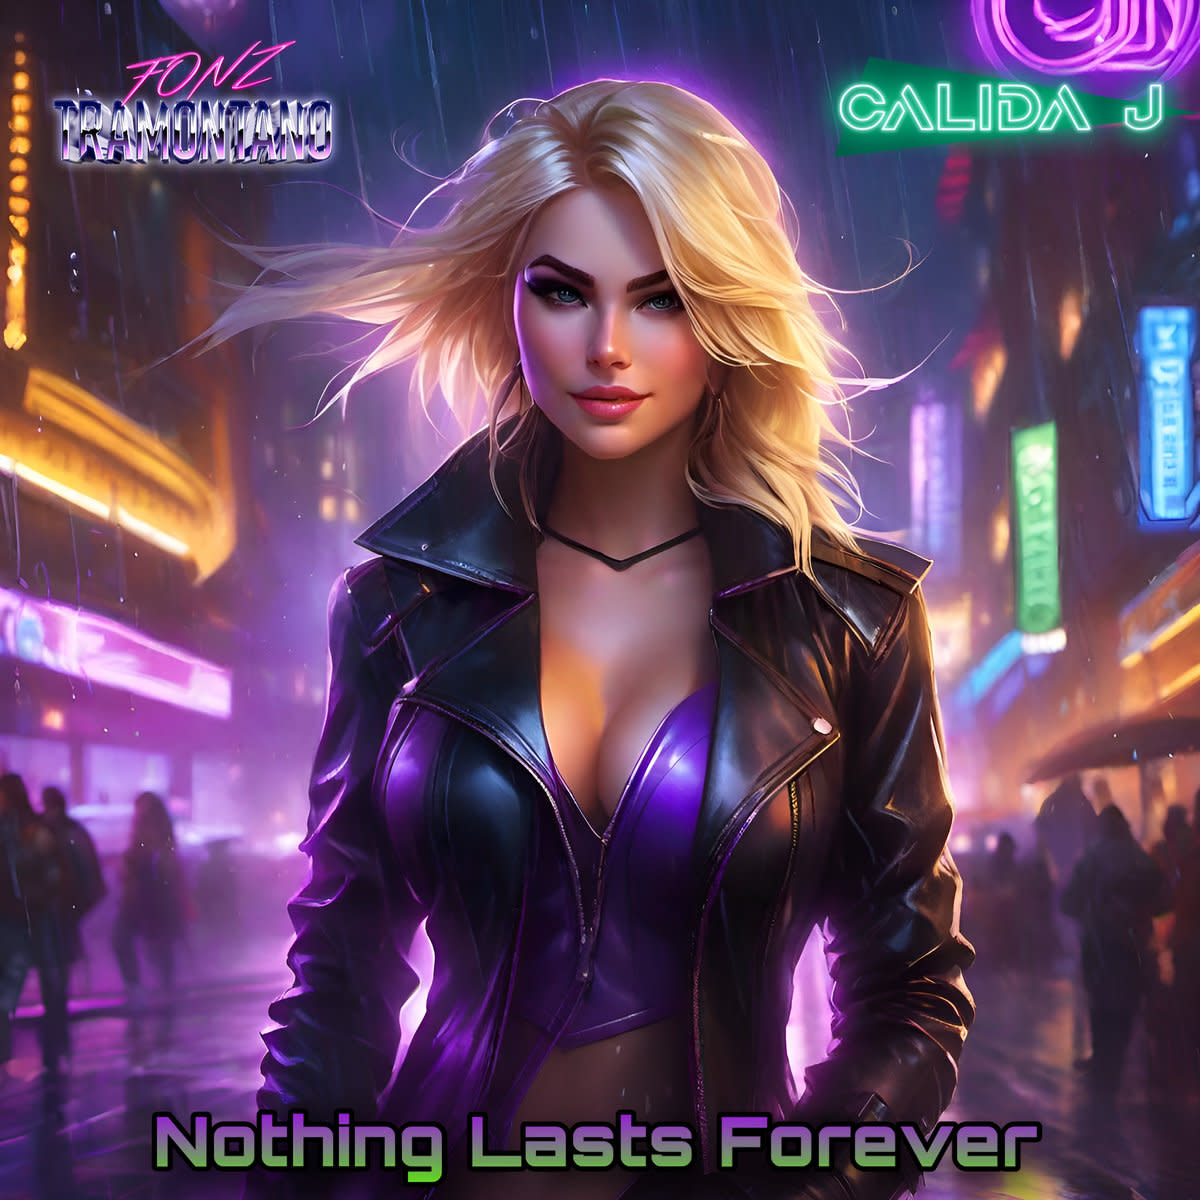 Synth Single Review: “Nothing Lasts Forever ’’ by Fonz Tramontano & Calida J